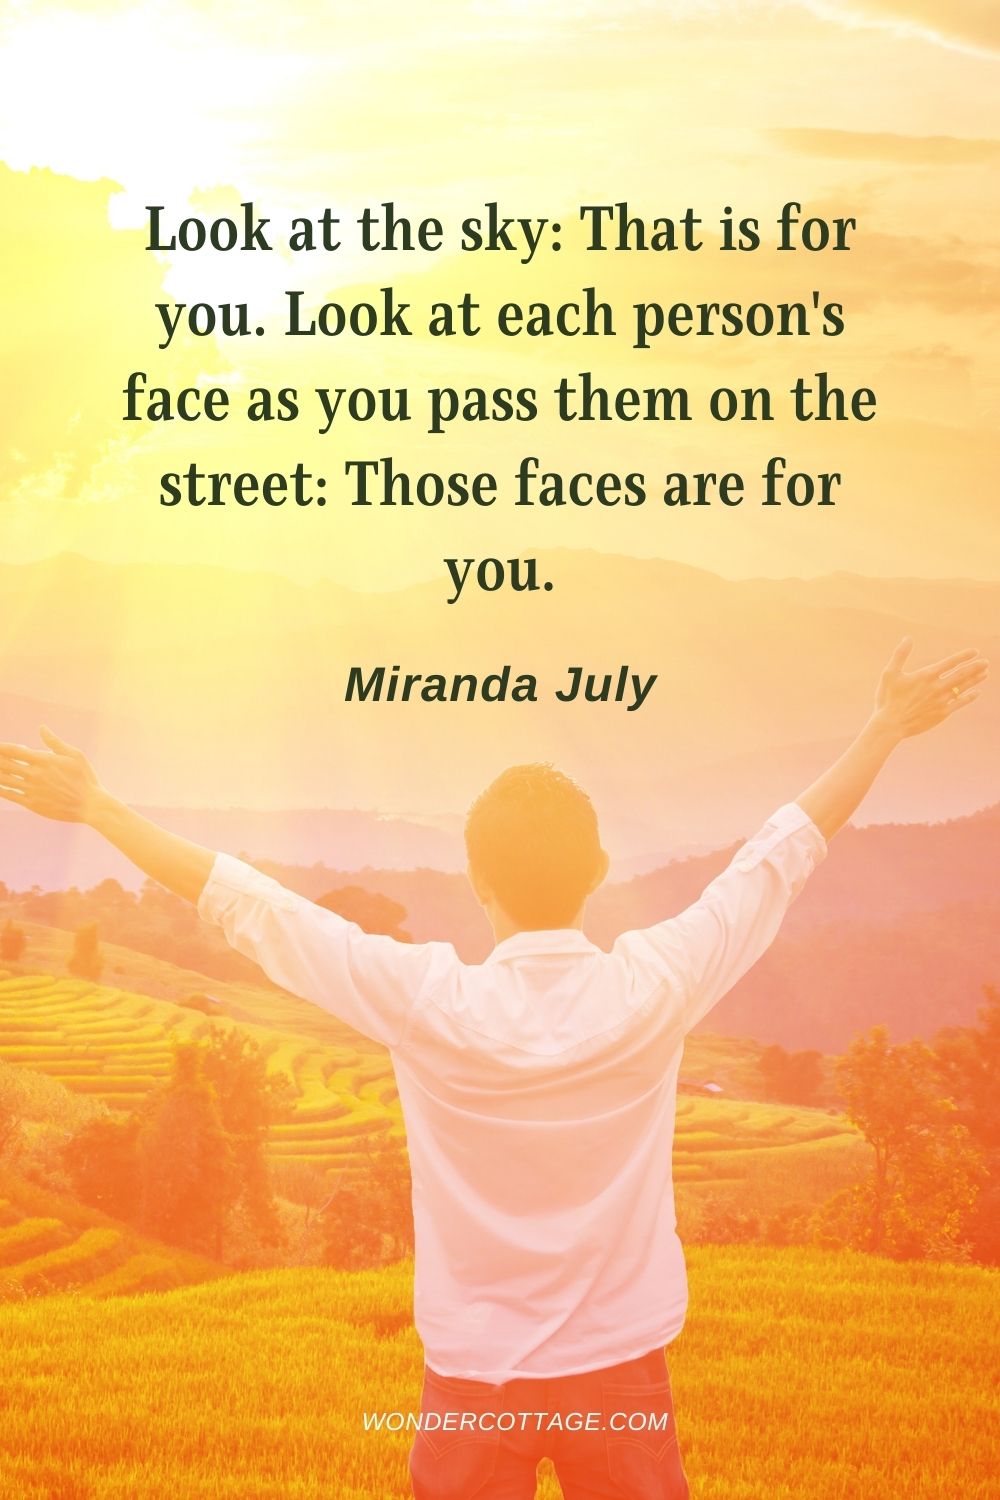 Look at the sky: That is for you. Look at each person's face as you pass them on the street: Those faces are for you. Miranda July